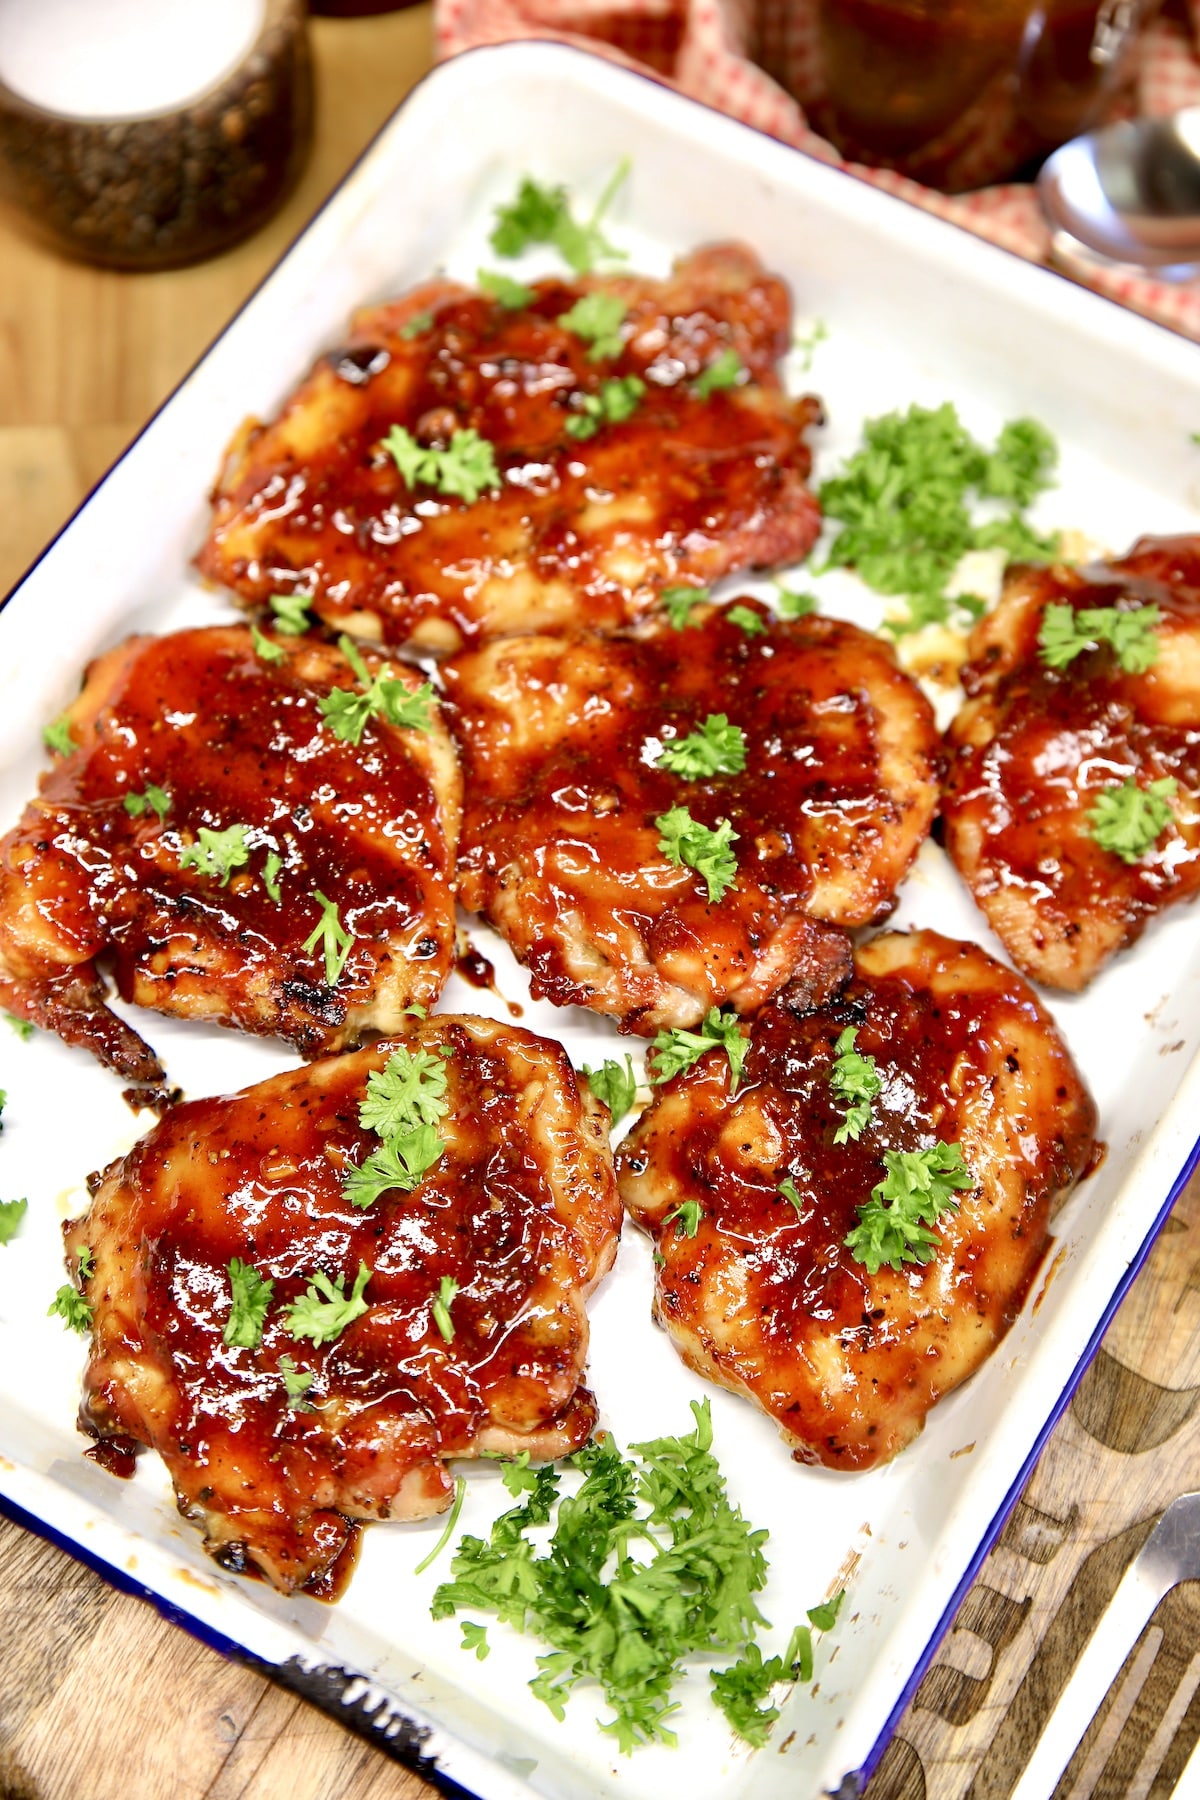 Platter of bbq chicken thighs on a platter with parsley garnish.